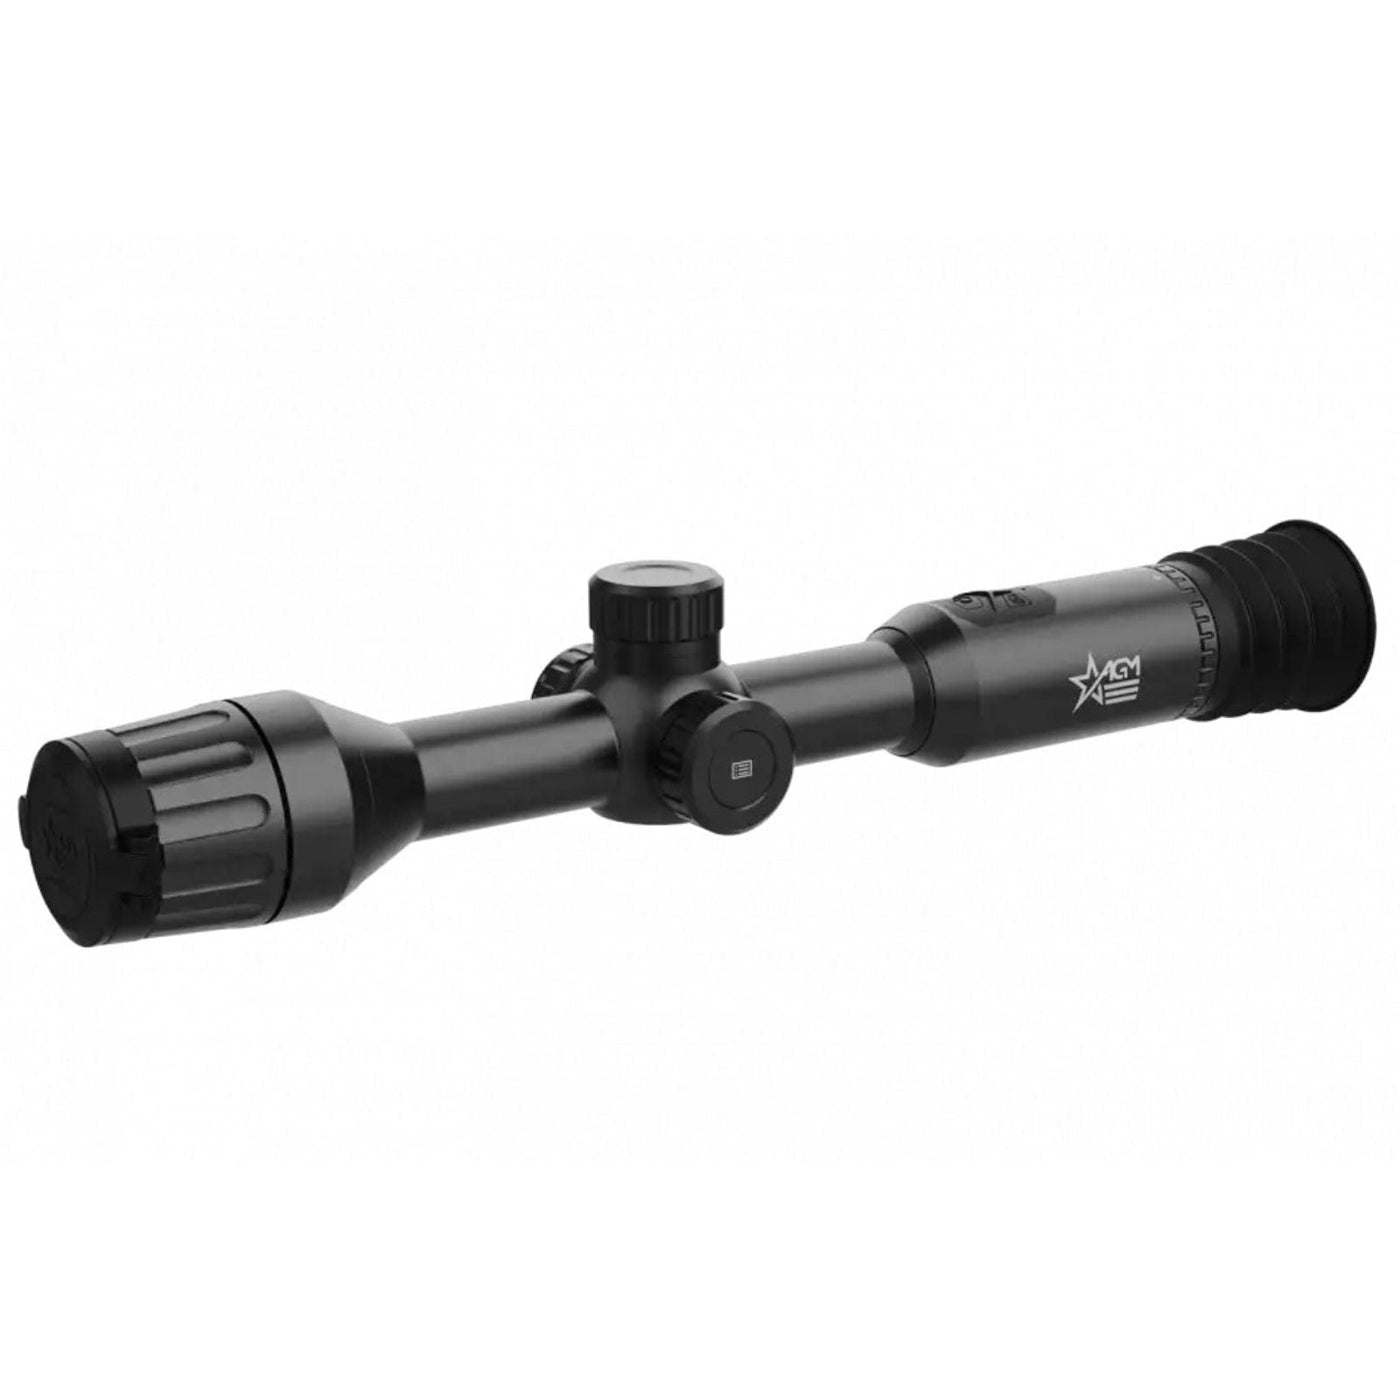 AGM AGM Varmint LRF TS35-640 Thermal Rifle Scope 12um 640x512 Nightvision And Thermal